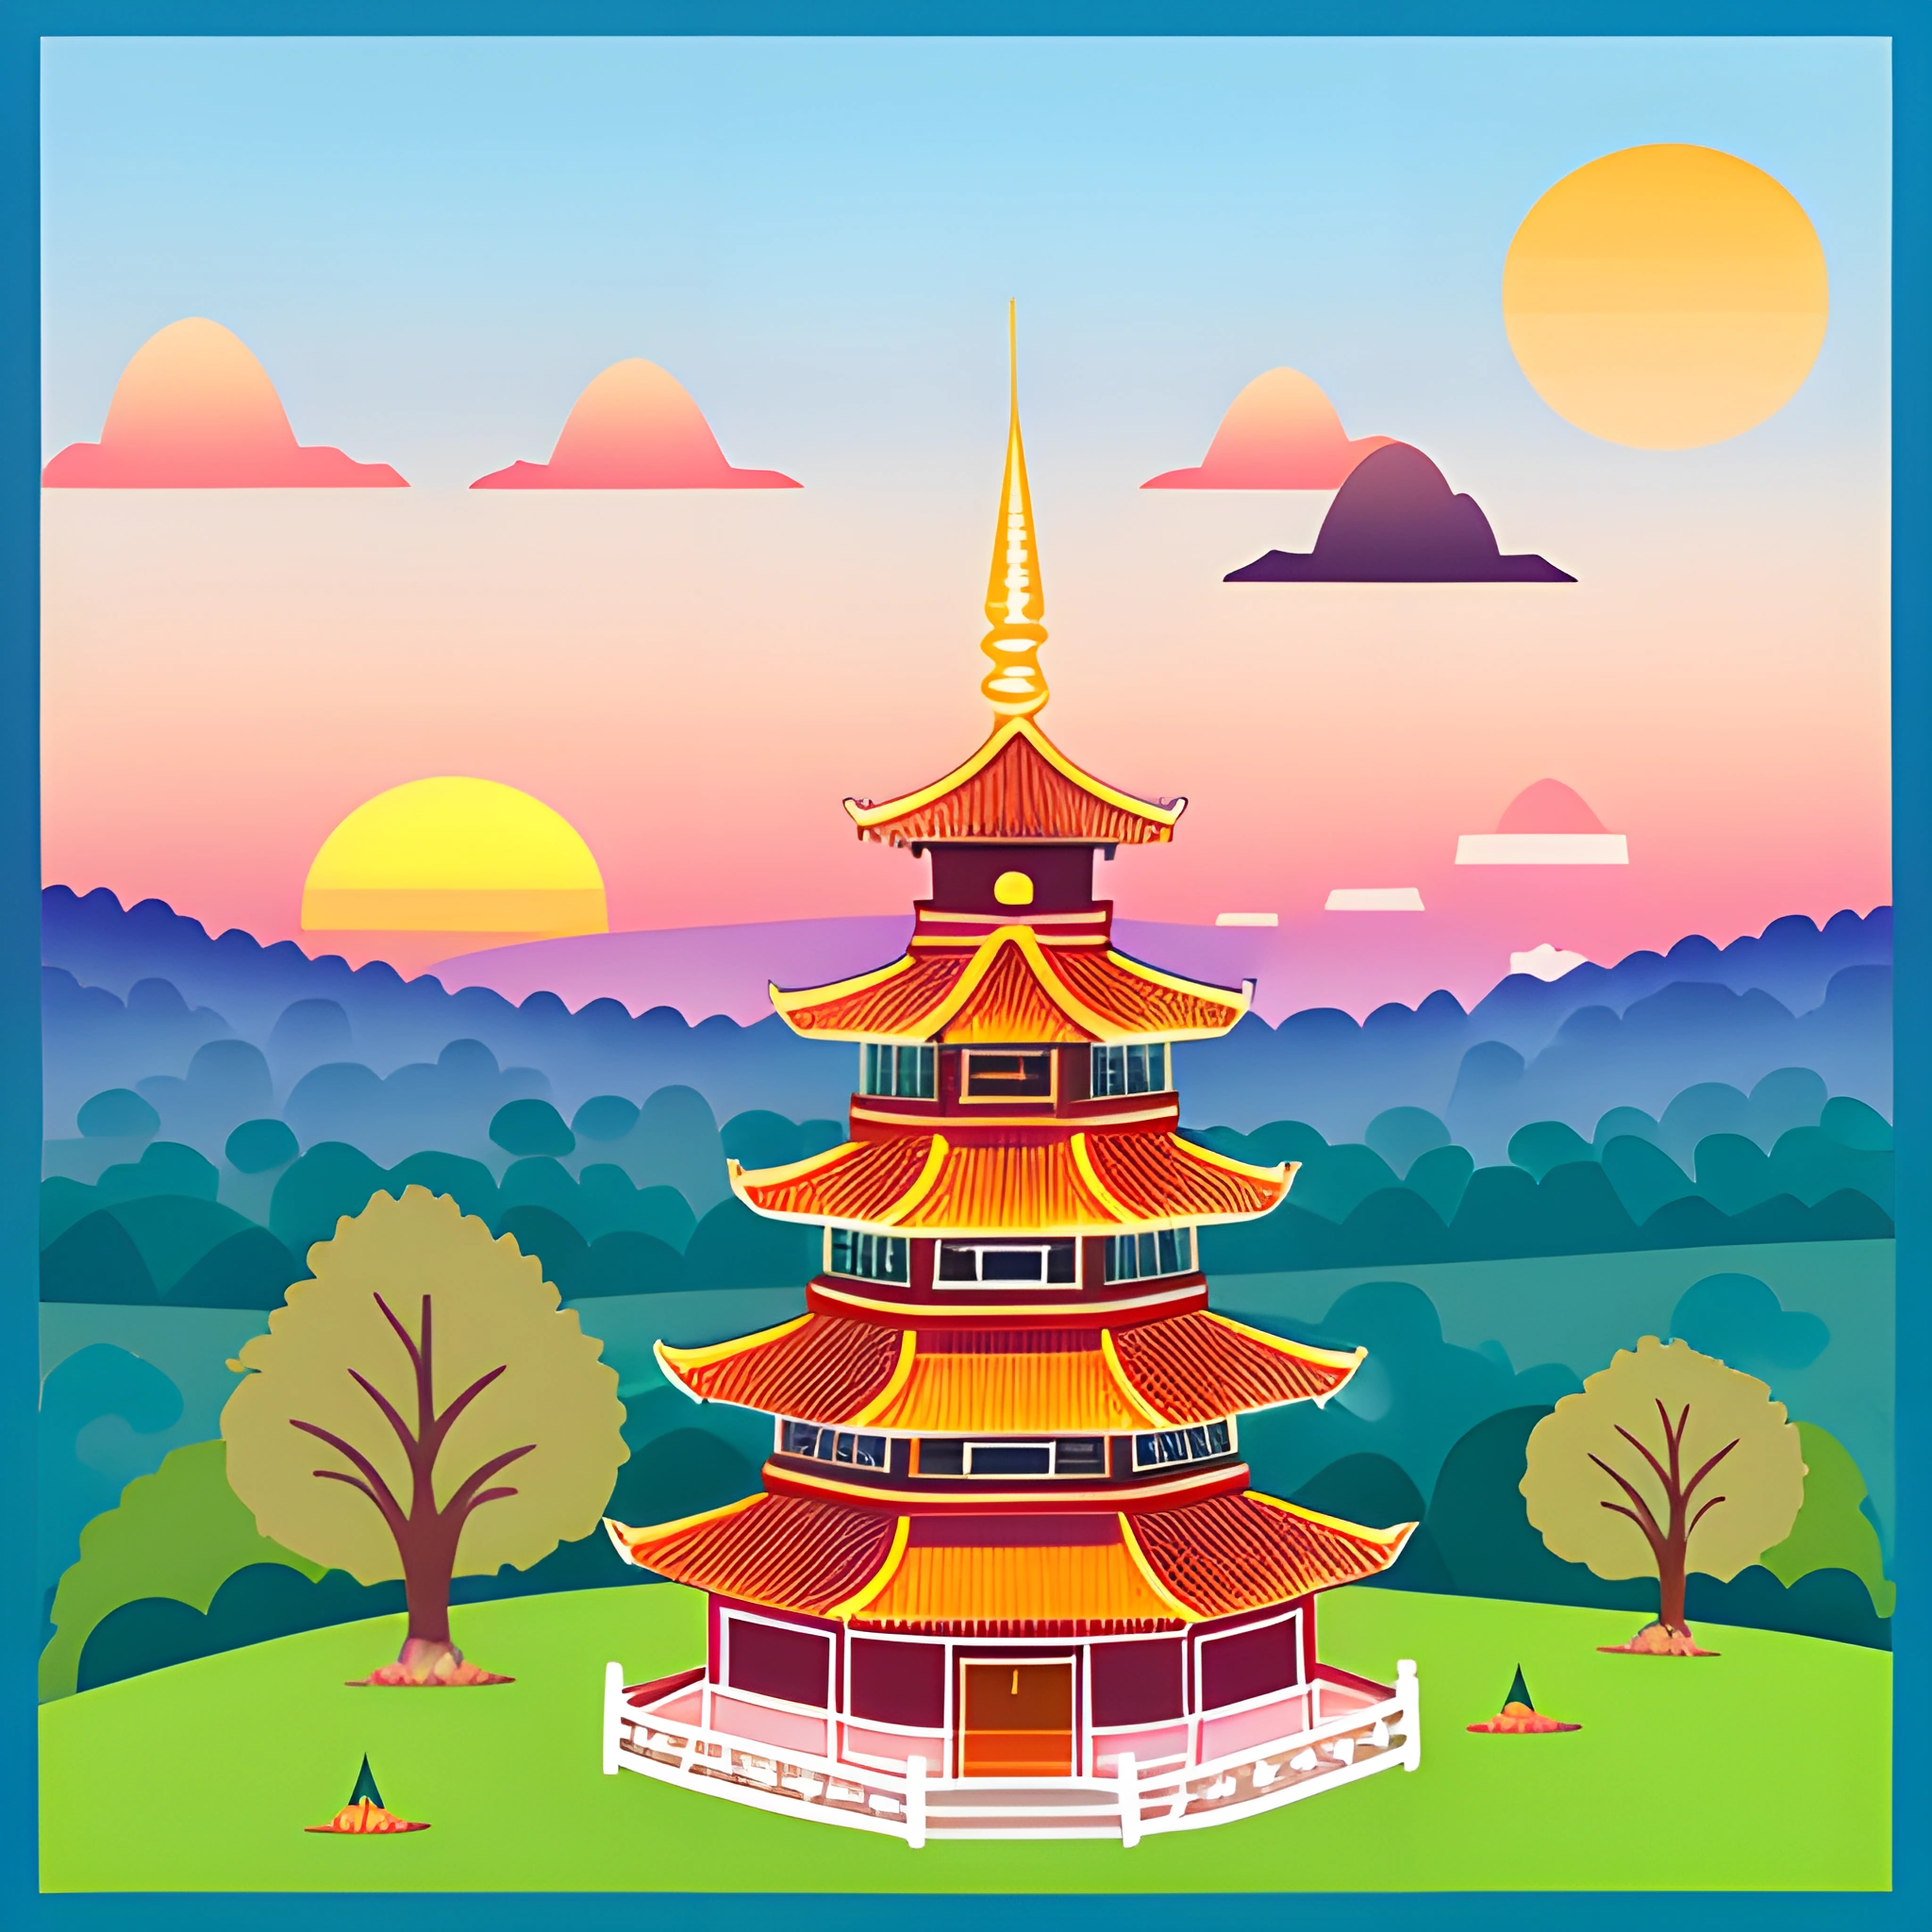 a pagoda in the middle of a field with trees